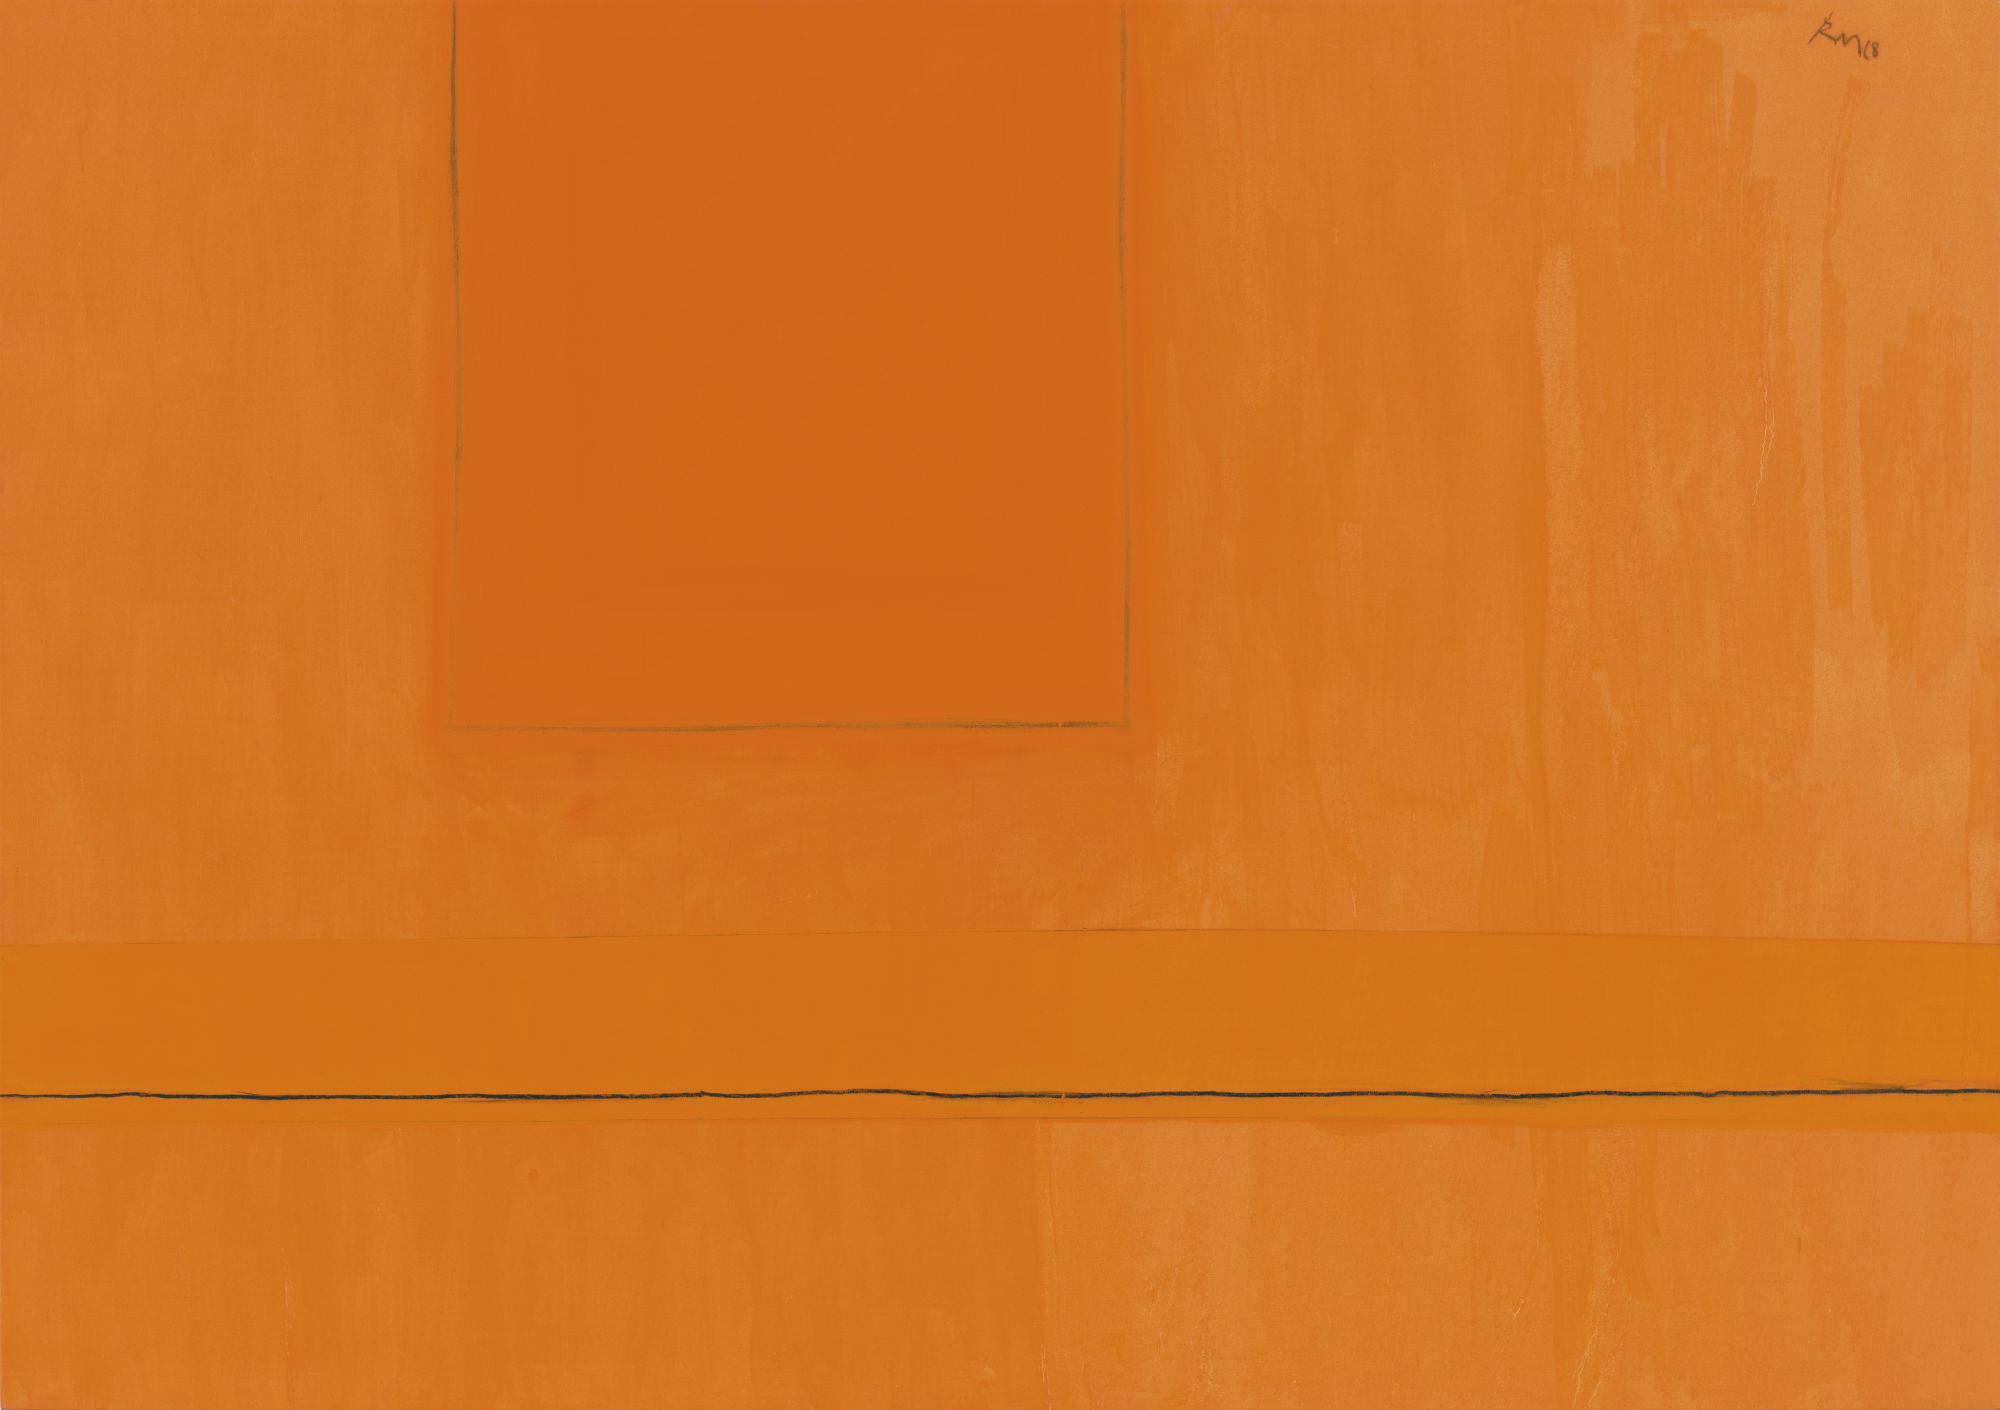 Open No. 24: In Variations of Orange, 1968. Acrylic and charcoal on canvas, 81 x 108 ¼ inches (205.7 x 275 cm)